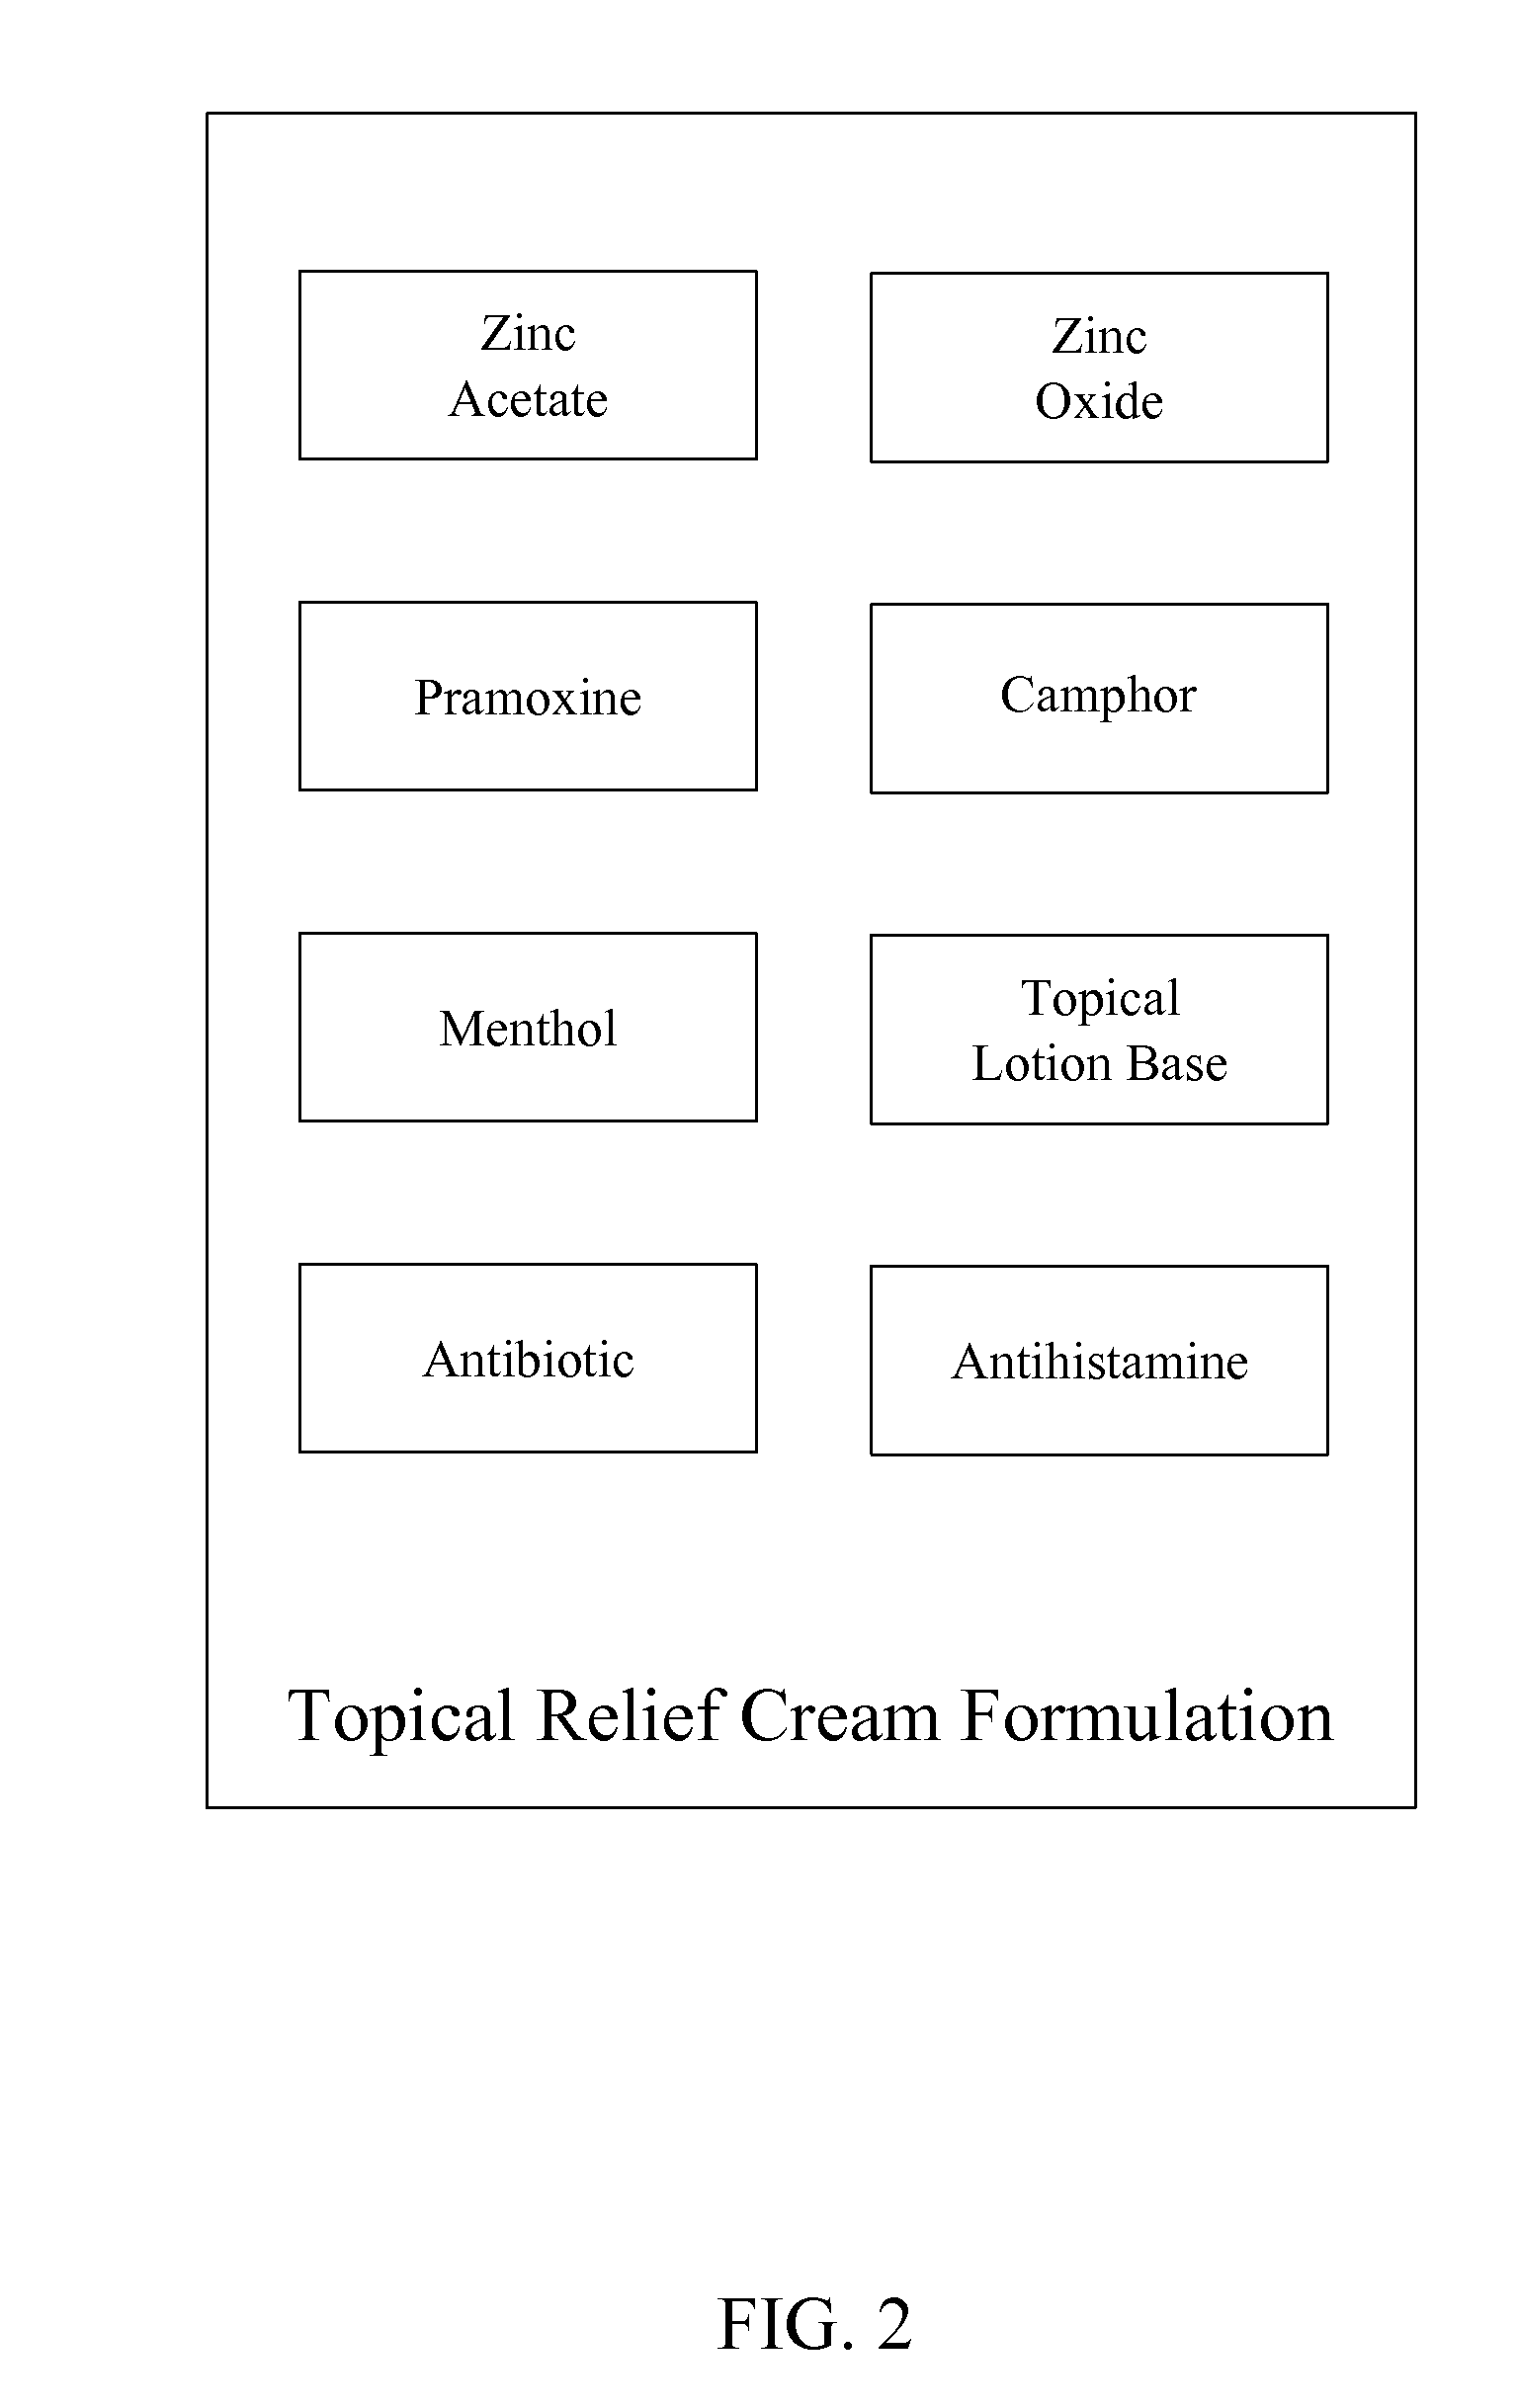 Topical Relief Cream Formulation for Allergic Reactions to Poison Ivy, Poison Oak, Poison Sumac, Minor Skin Irritations and Insect Bites